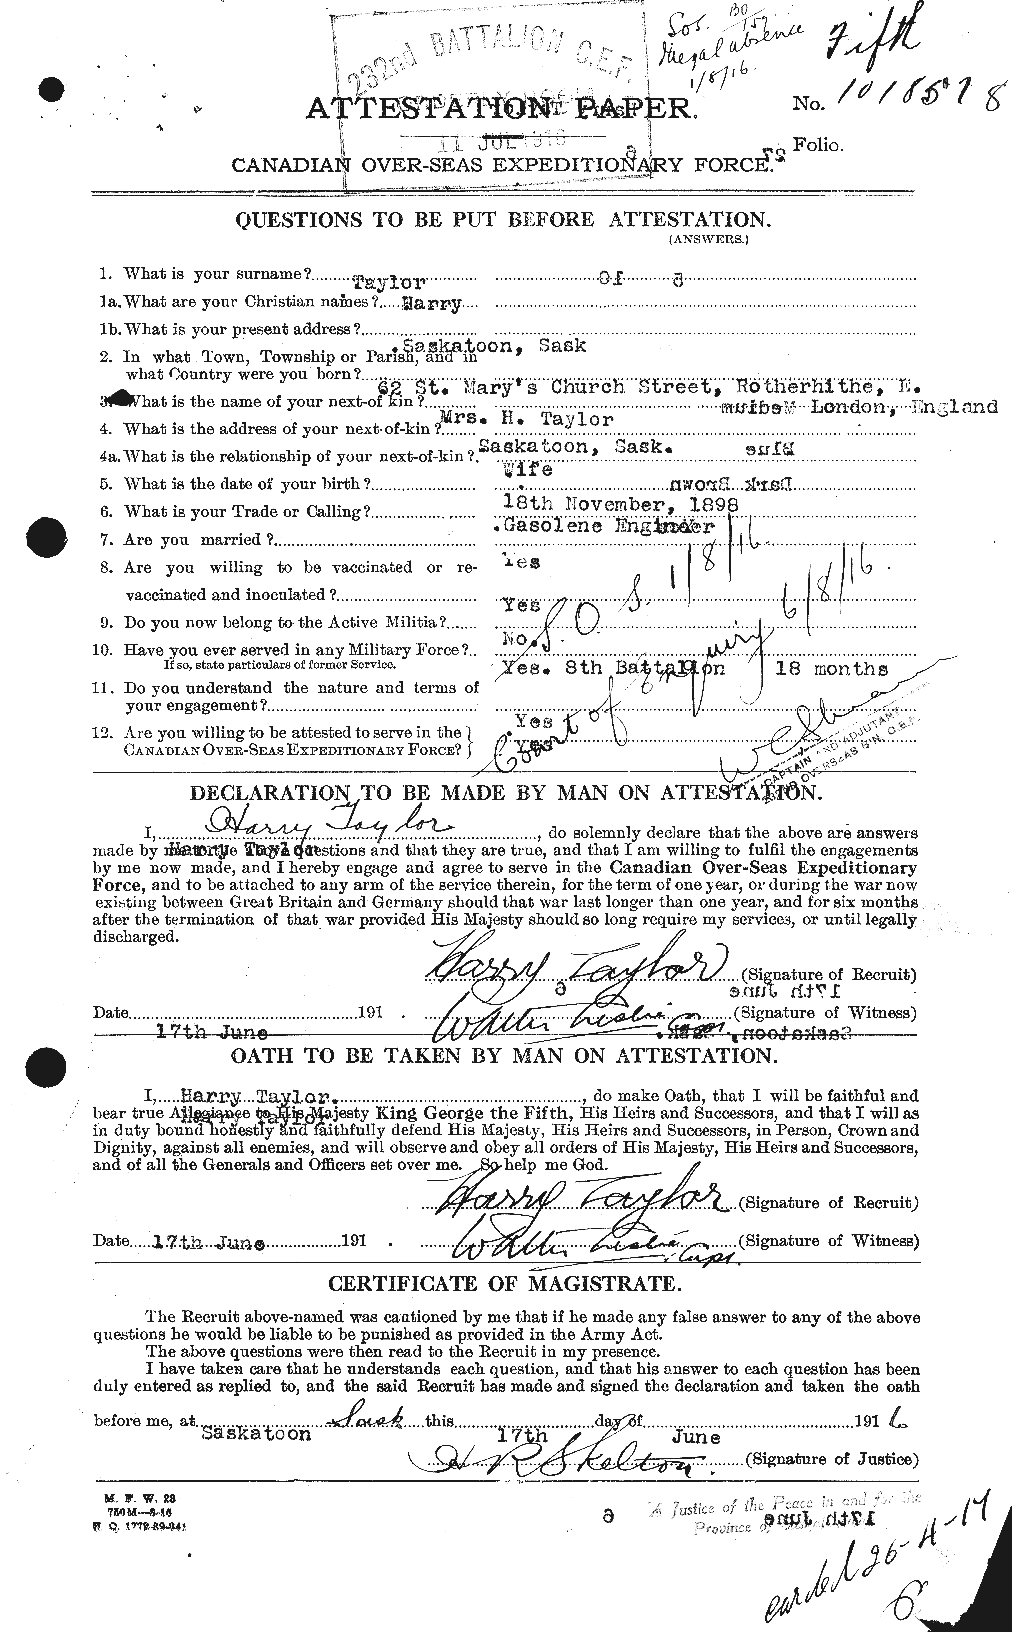 Personnel Records of the First World War - CEF 626453a